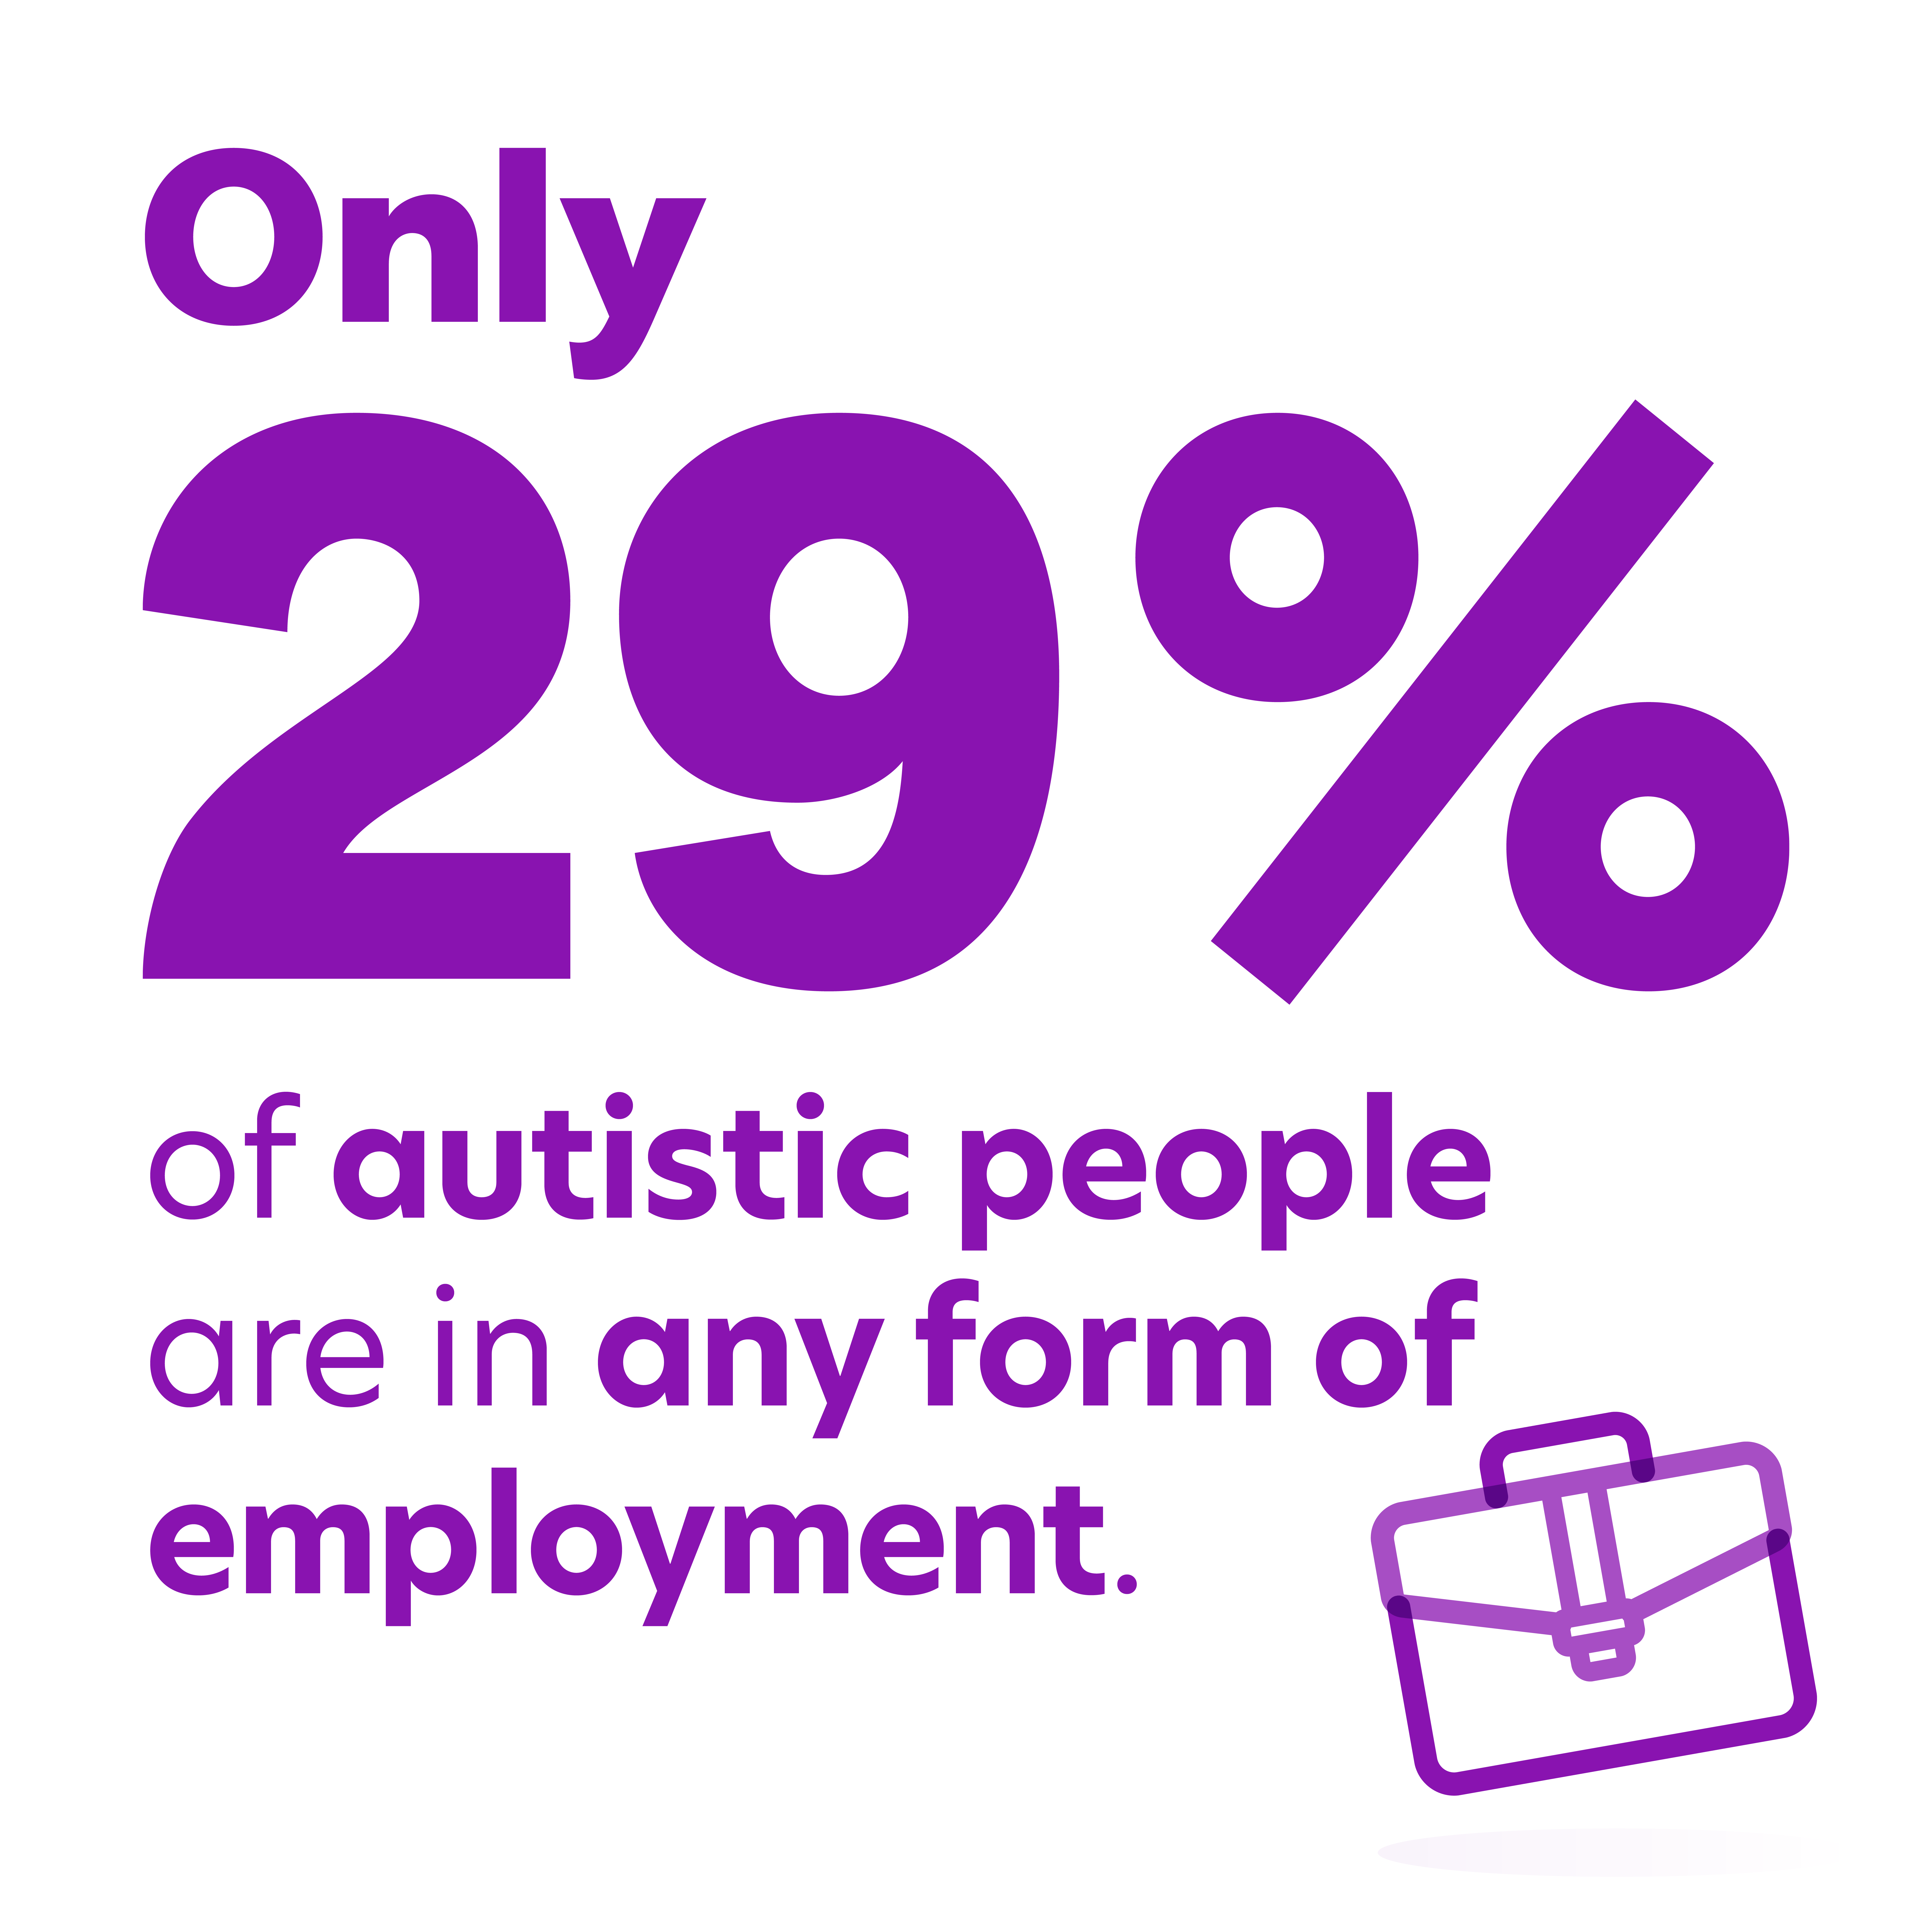 Only 29% of autistic people are in any form of employment 